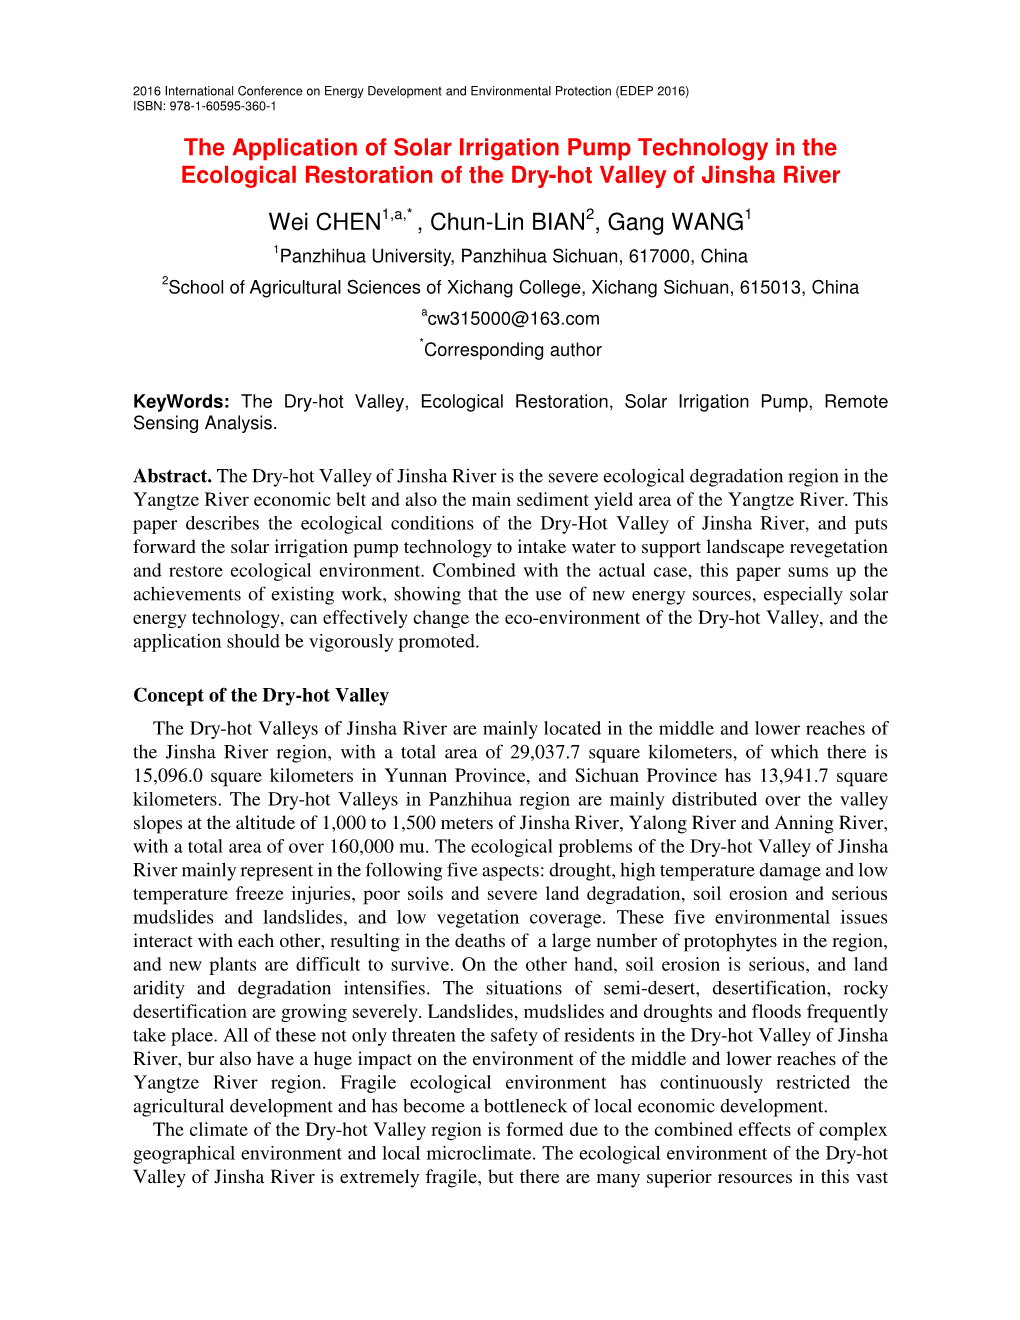 The Application of Solar Irrigation Pump Technology in the Ecological Restoration of the Dry-Hot Valley of Jinsha River